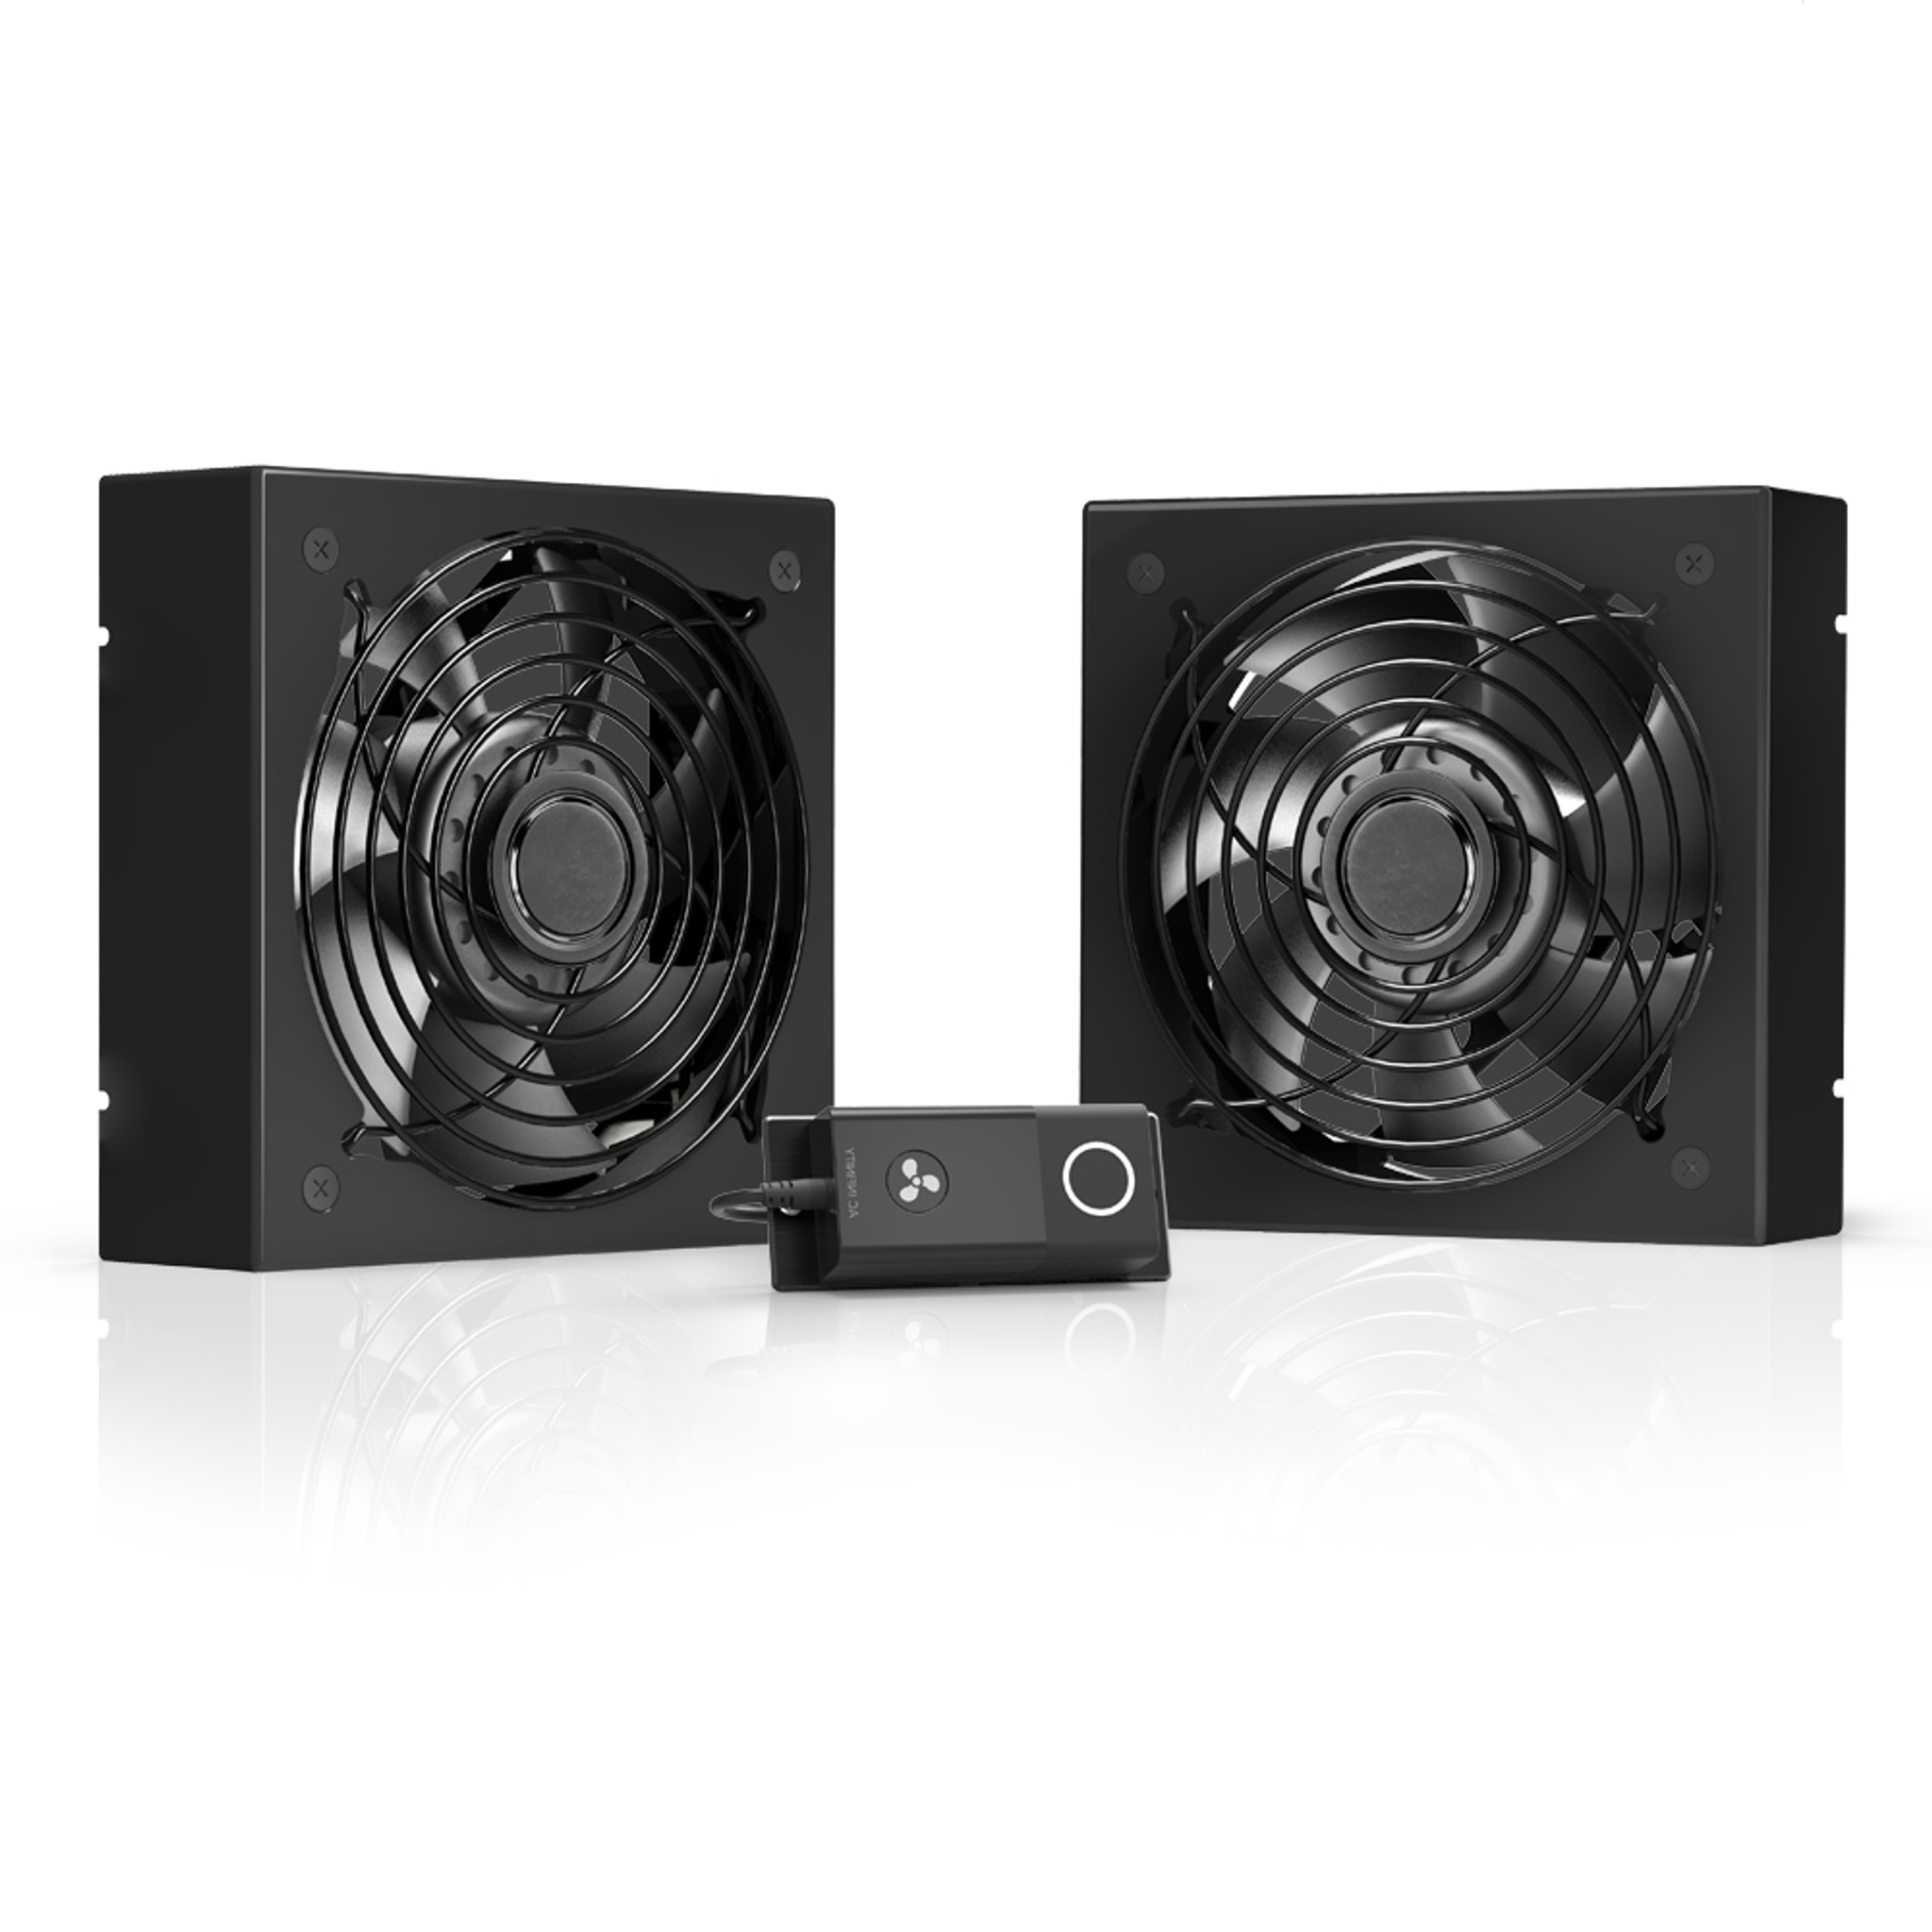 Rack Roof Fan Kit, Dual Cooling-Fans with Speed Controller